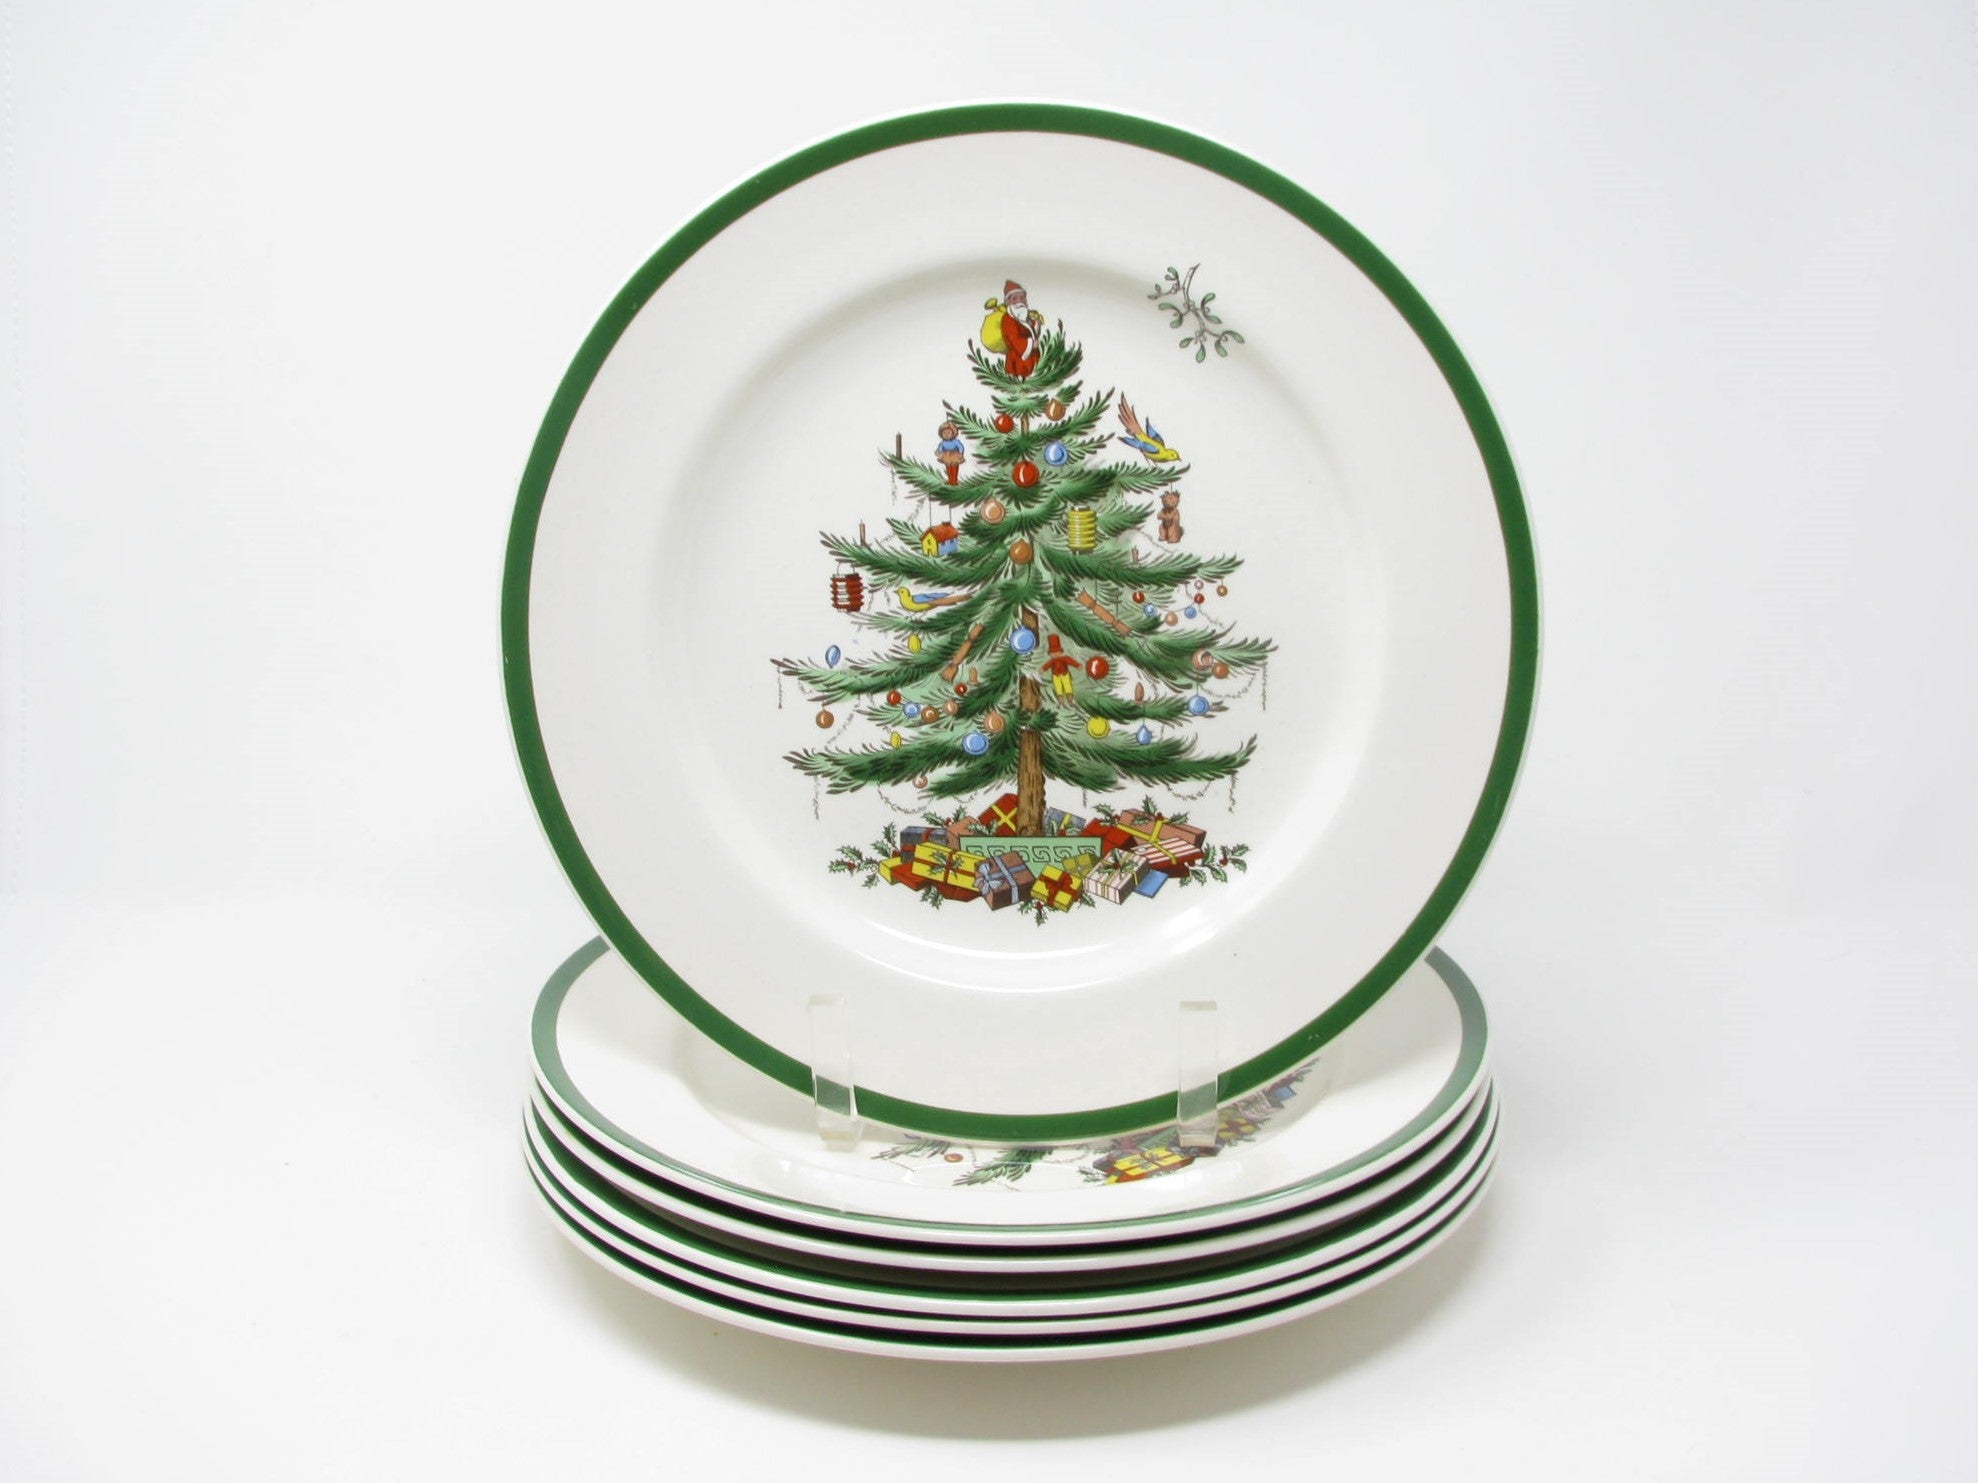 edgebrookhouse - Vintage Spode Christmas Tree Earthenware Dinner Plates Made in England - 6 Pieces